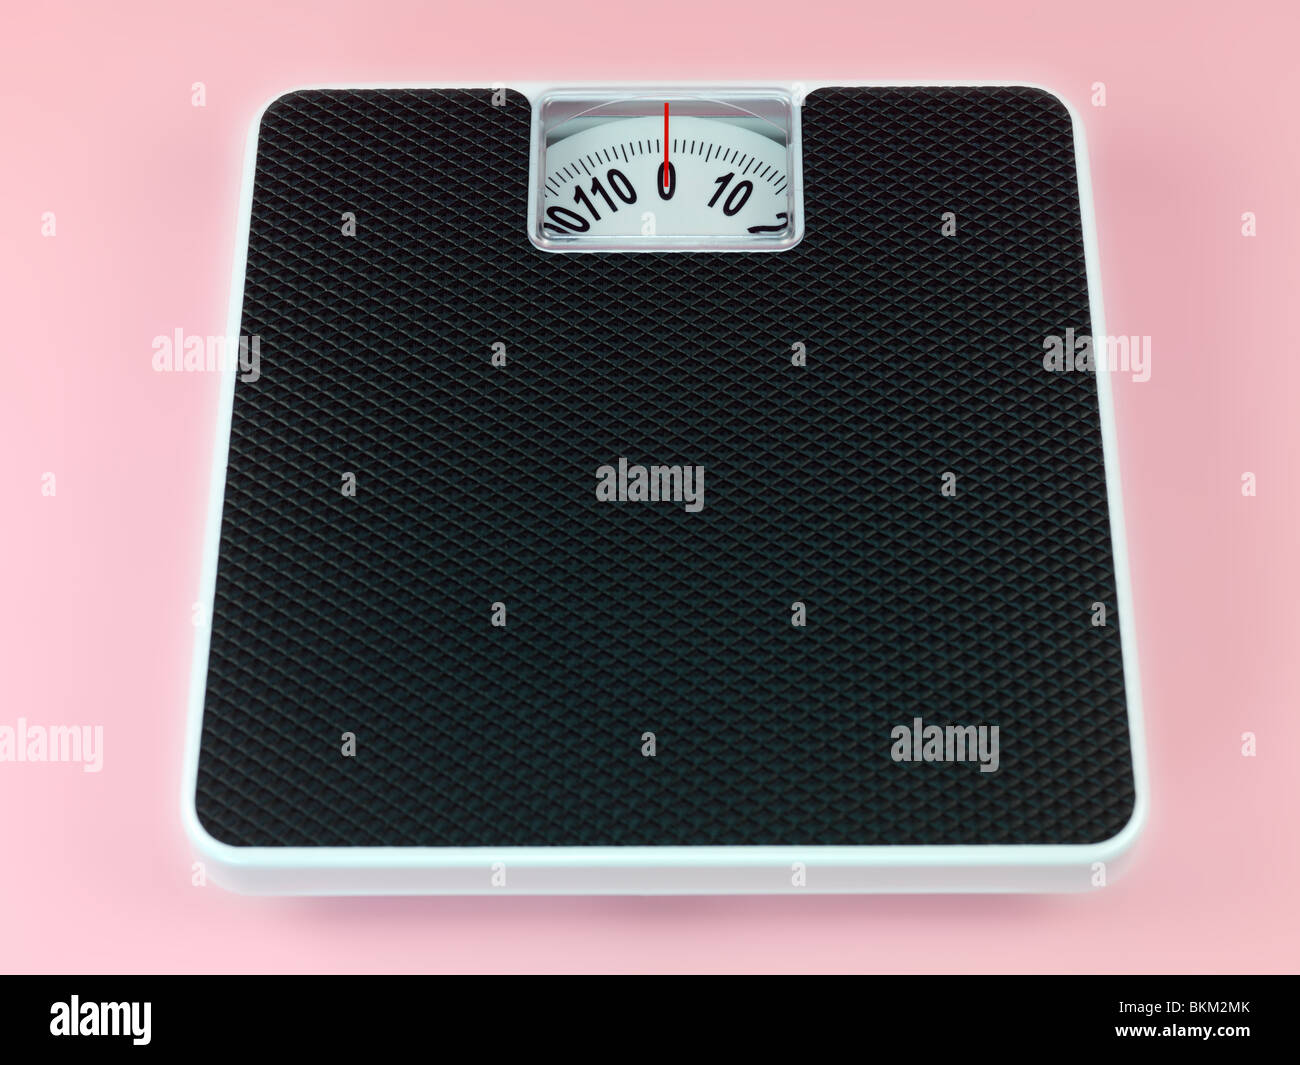 6,206 Pink Weight Scale Images, Stock Photos, 3D objects